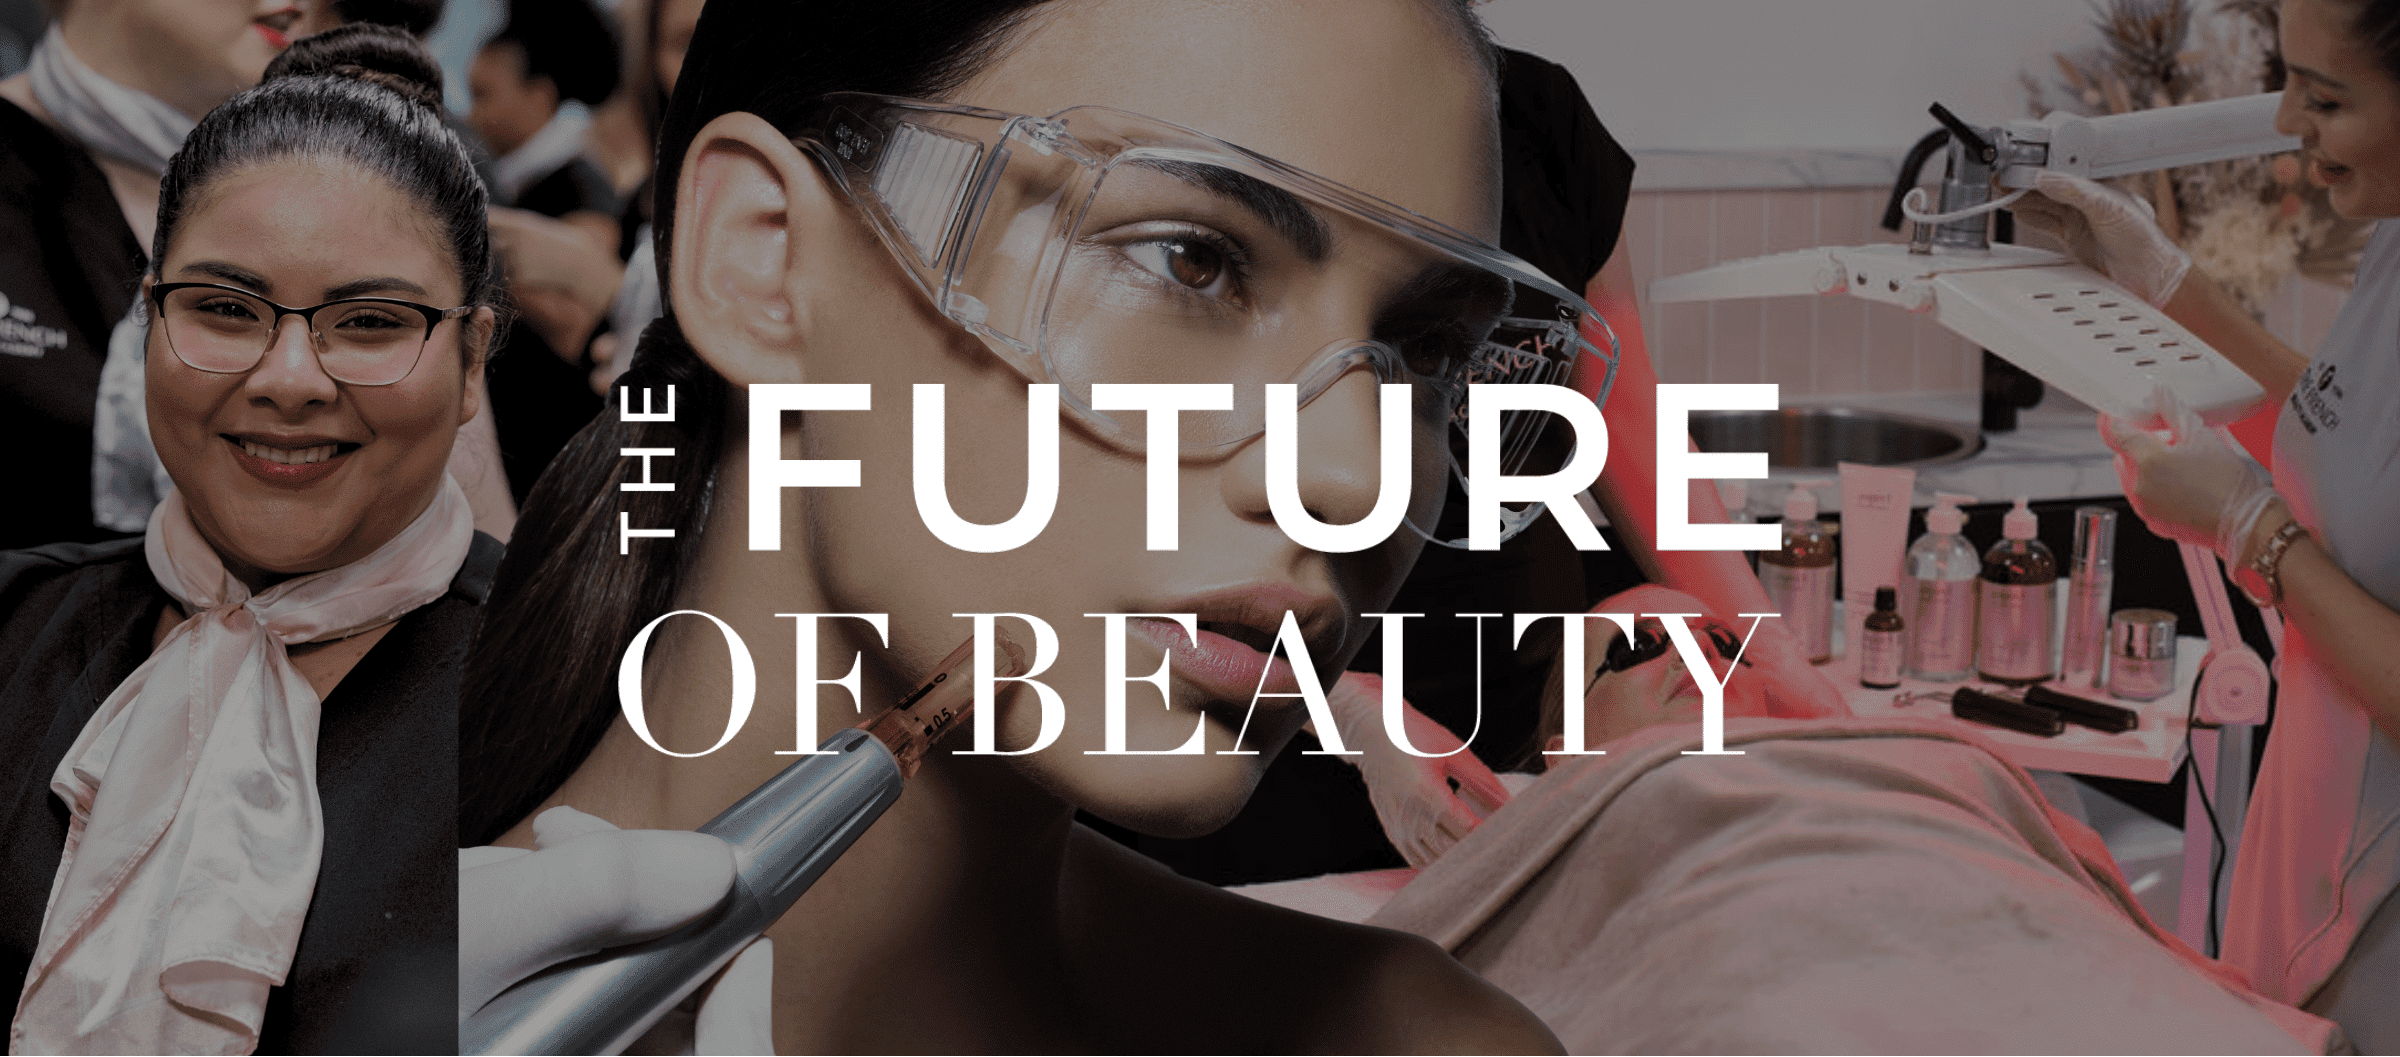 The title reads "The Future of Beauty". Behind is a collage of images of a beauty school student smiling, a model receiving skin needling collagen induction therapy wearing protective glasses, and a French Beauty Academy teacher giving an LED light therapy treatment.